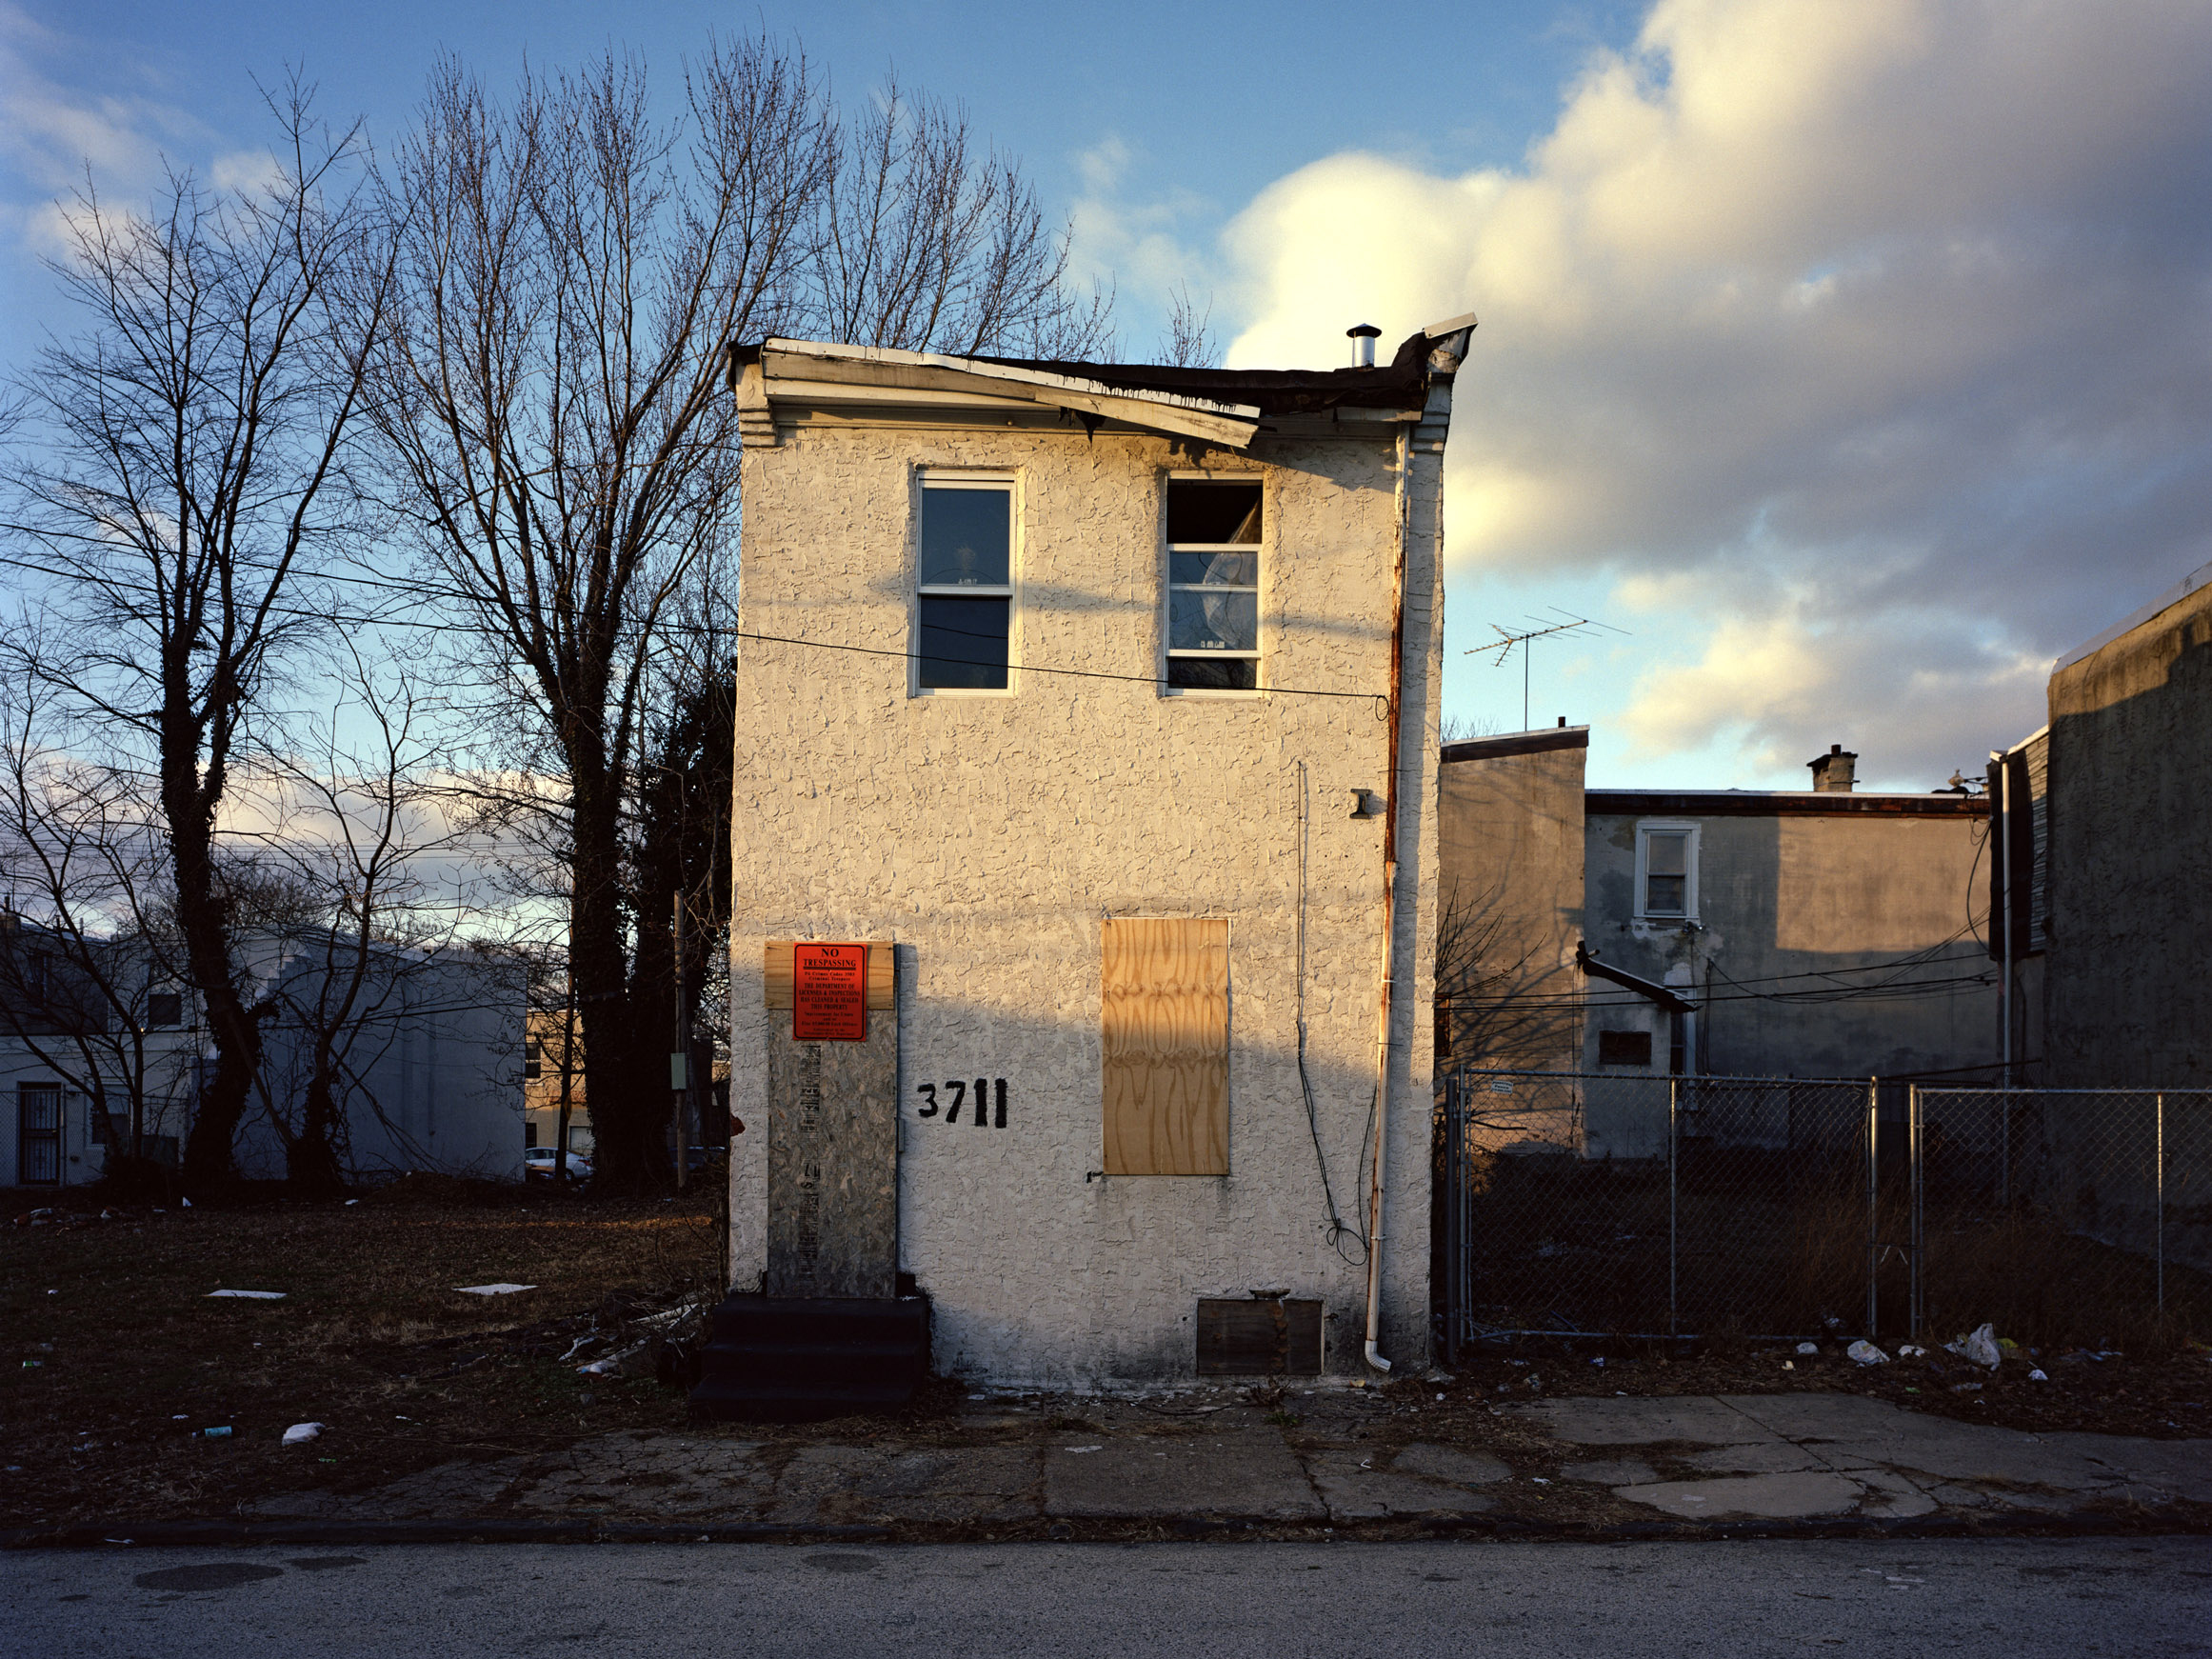 Funeral for a Home: Excerpts from a Conversation with Robert Blackson ...